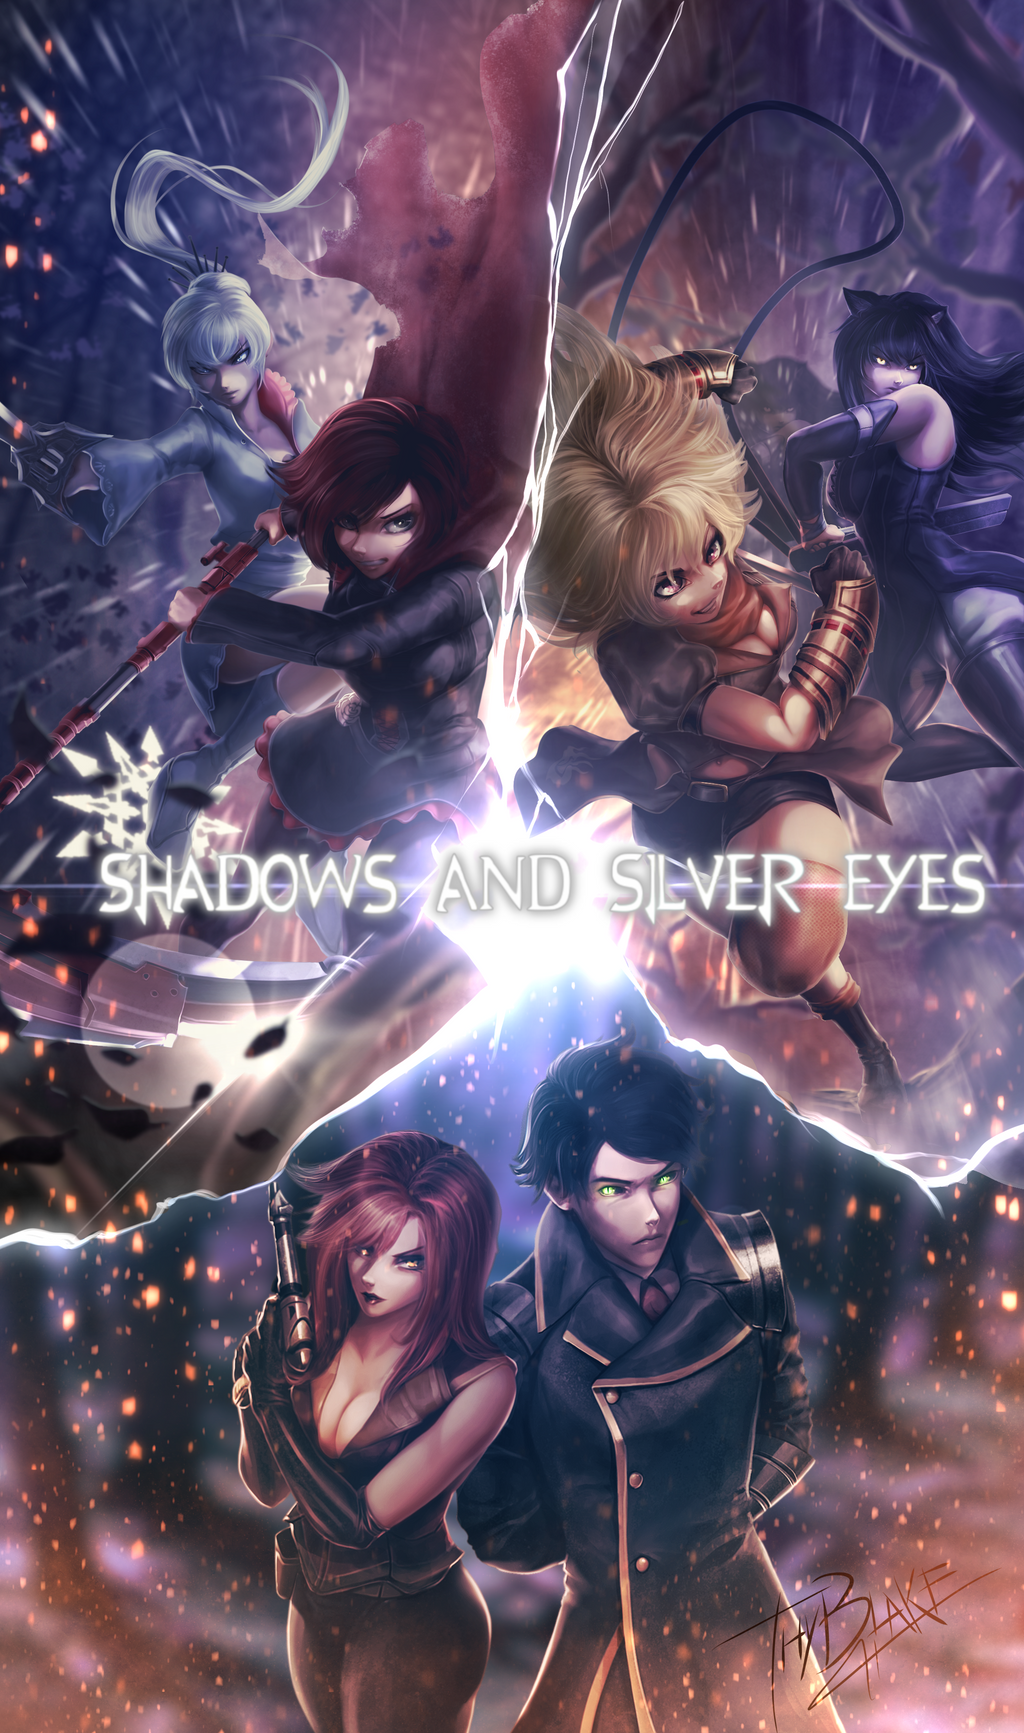 shadows_and_silver_eyes_cover_art__rwby_fanfic__by_thyblake_dd33z7a-fullview.png